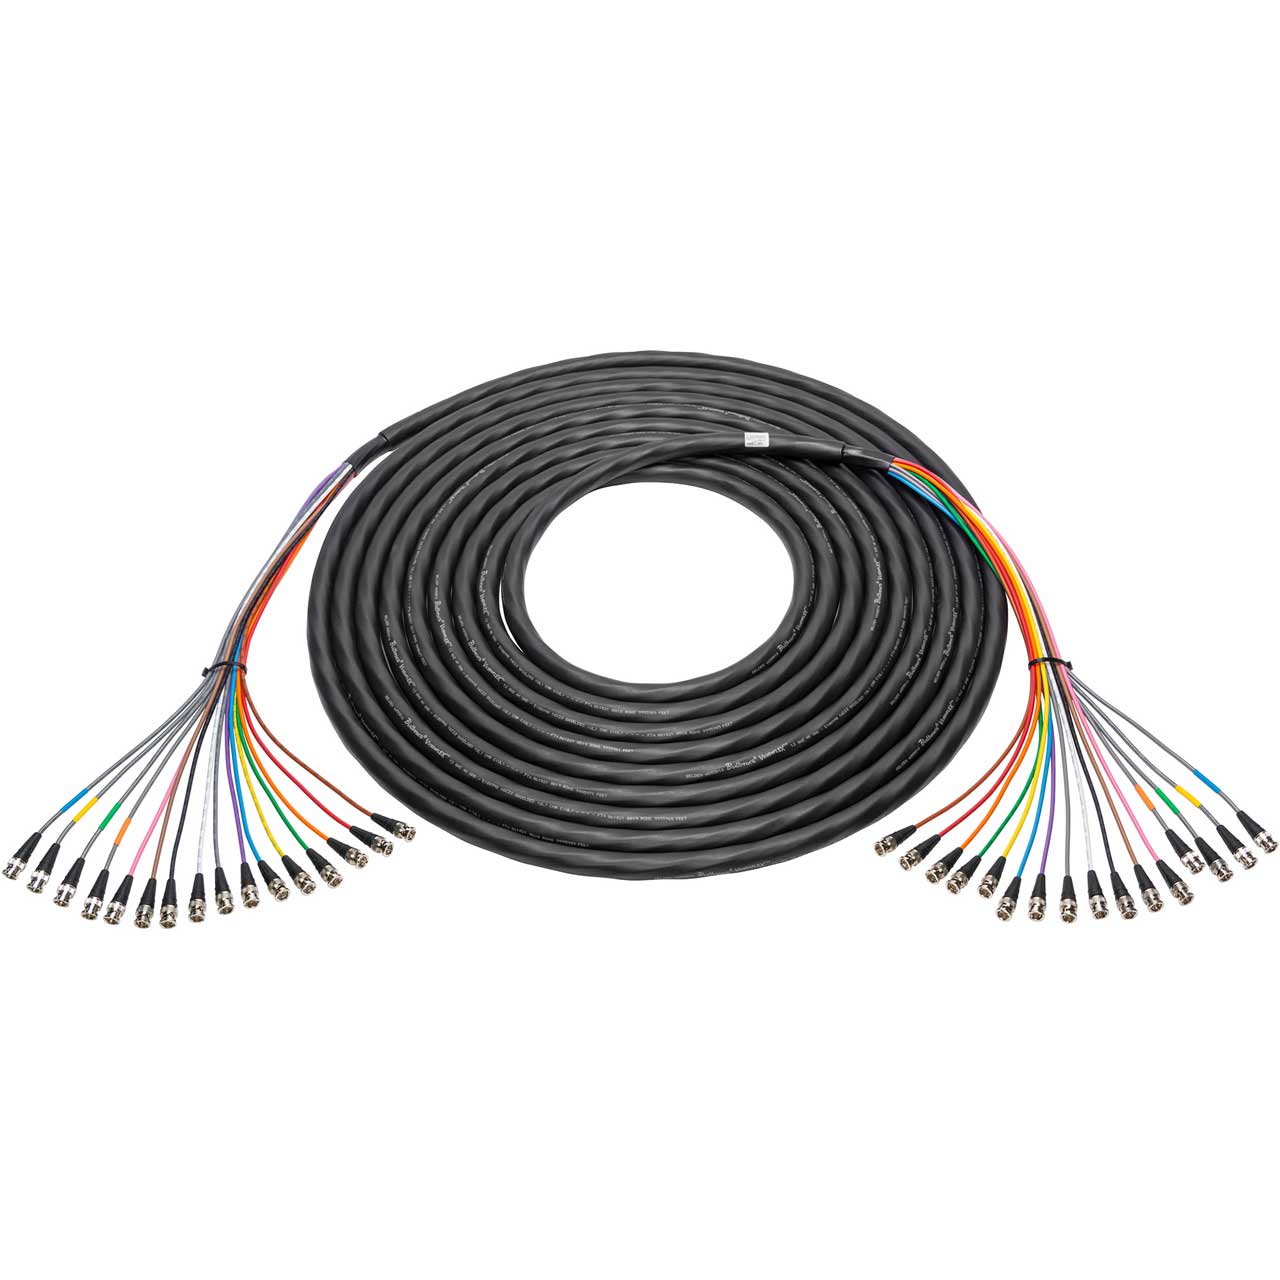 Laird 4855R16-BB-006 16-Channel 12G-SDI / 4K UHD BNC Male to BNC Male Snake Cable - 6 Foot 4855R16-BB-006